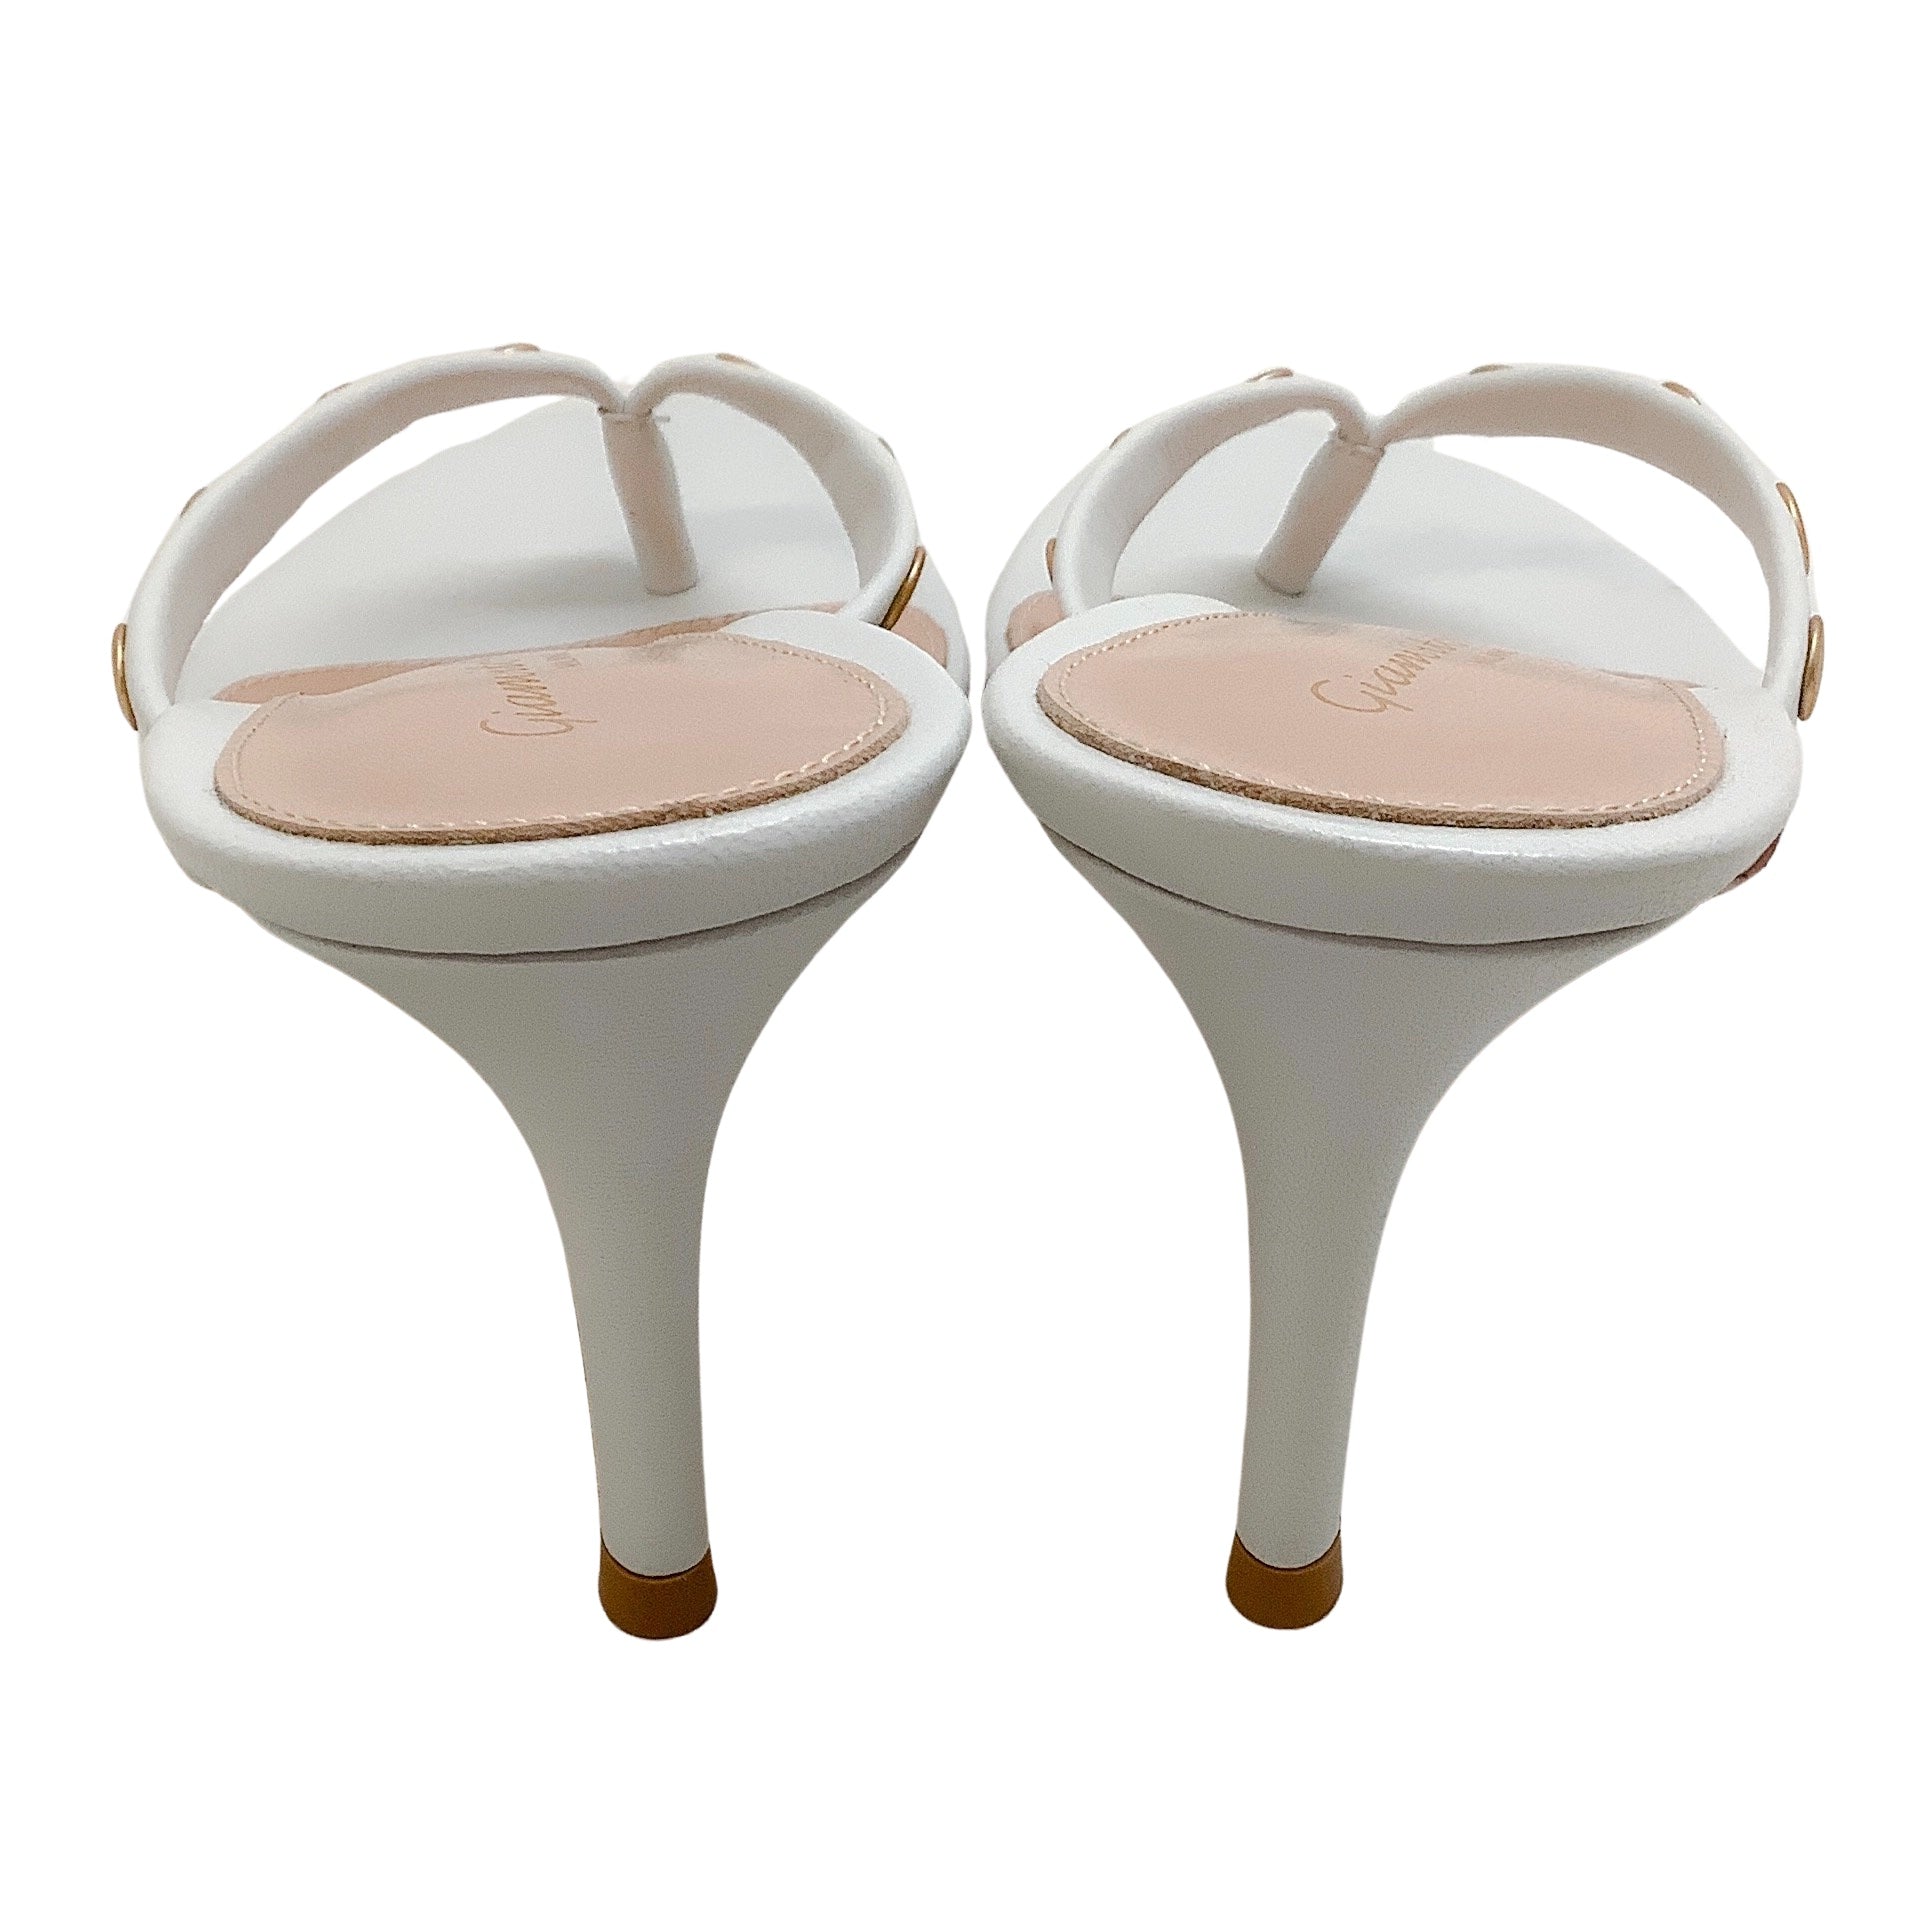 Gianvito Rossi White Leather Thong Sandal with Gold Studs